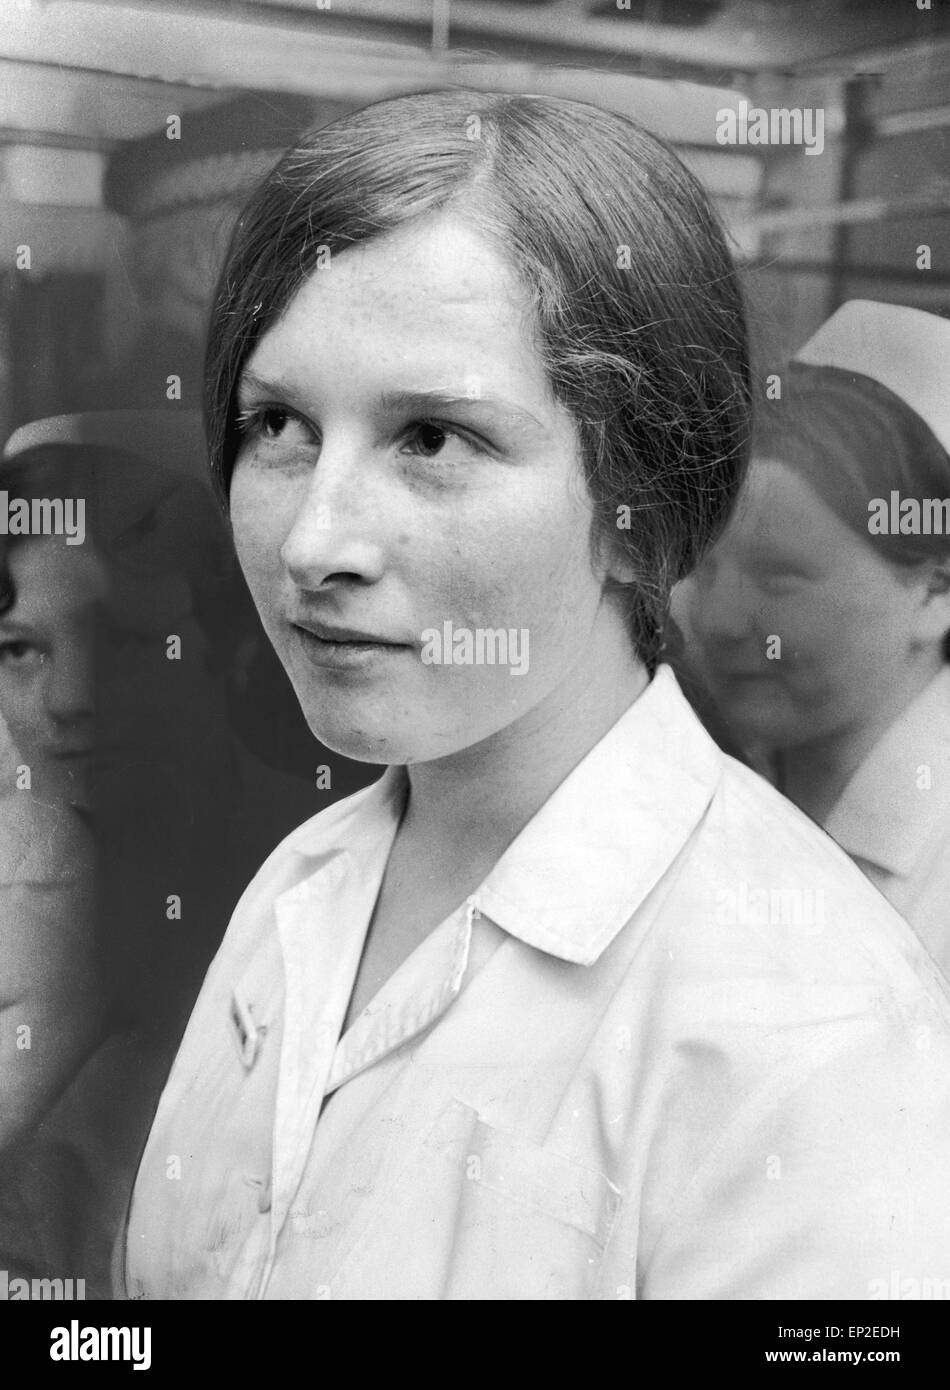 A fire broke out in a cupboar in St Margaret's Hospice, run by the Irish Sisiters of Mercy in East Barn Street, Clydebank. Pictured is Mary Fee of McGregor Street, age 16, a nurse who ran for a fire hose. Stock Photo